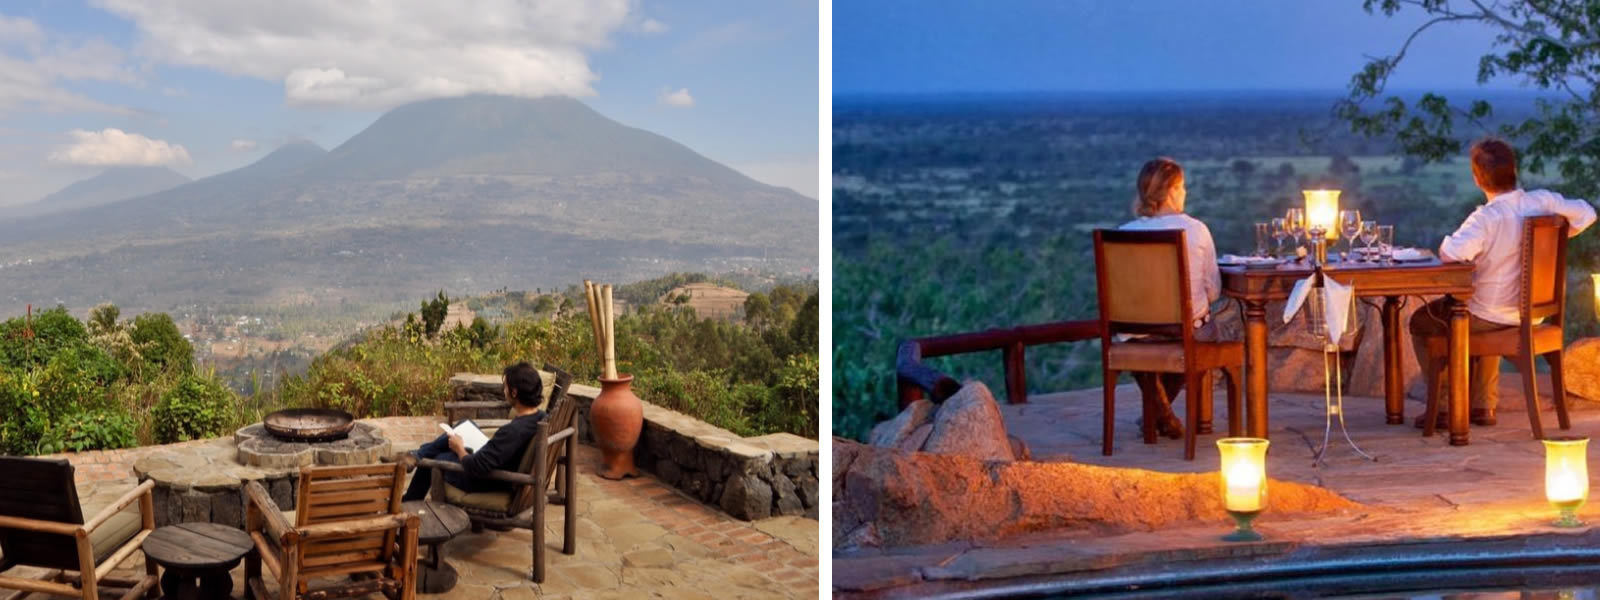 Places to go for honeymoon tours in Rwanda